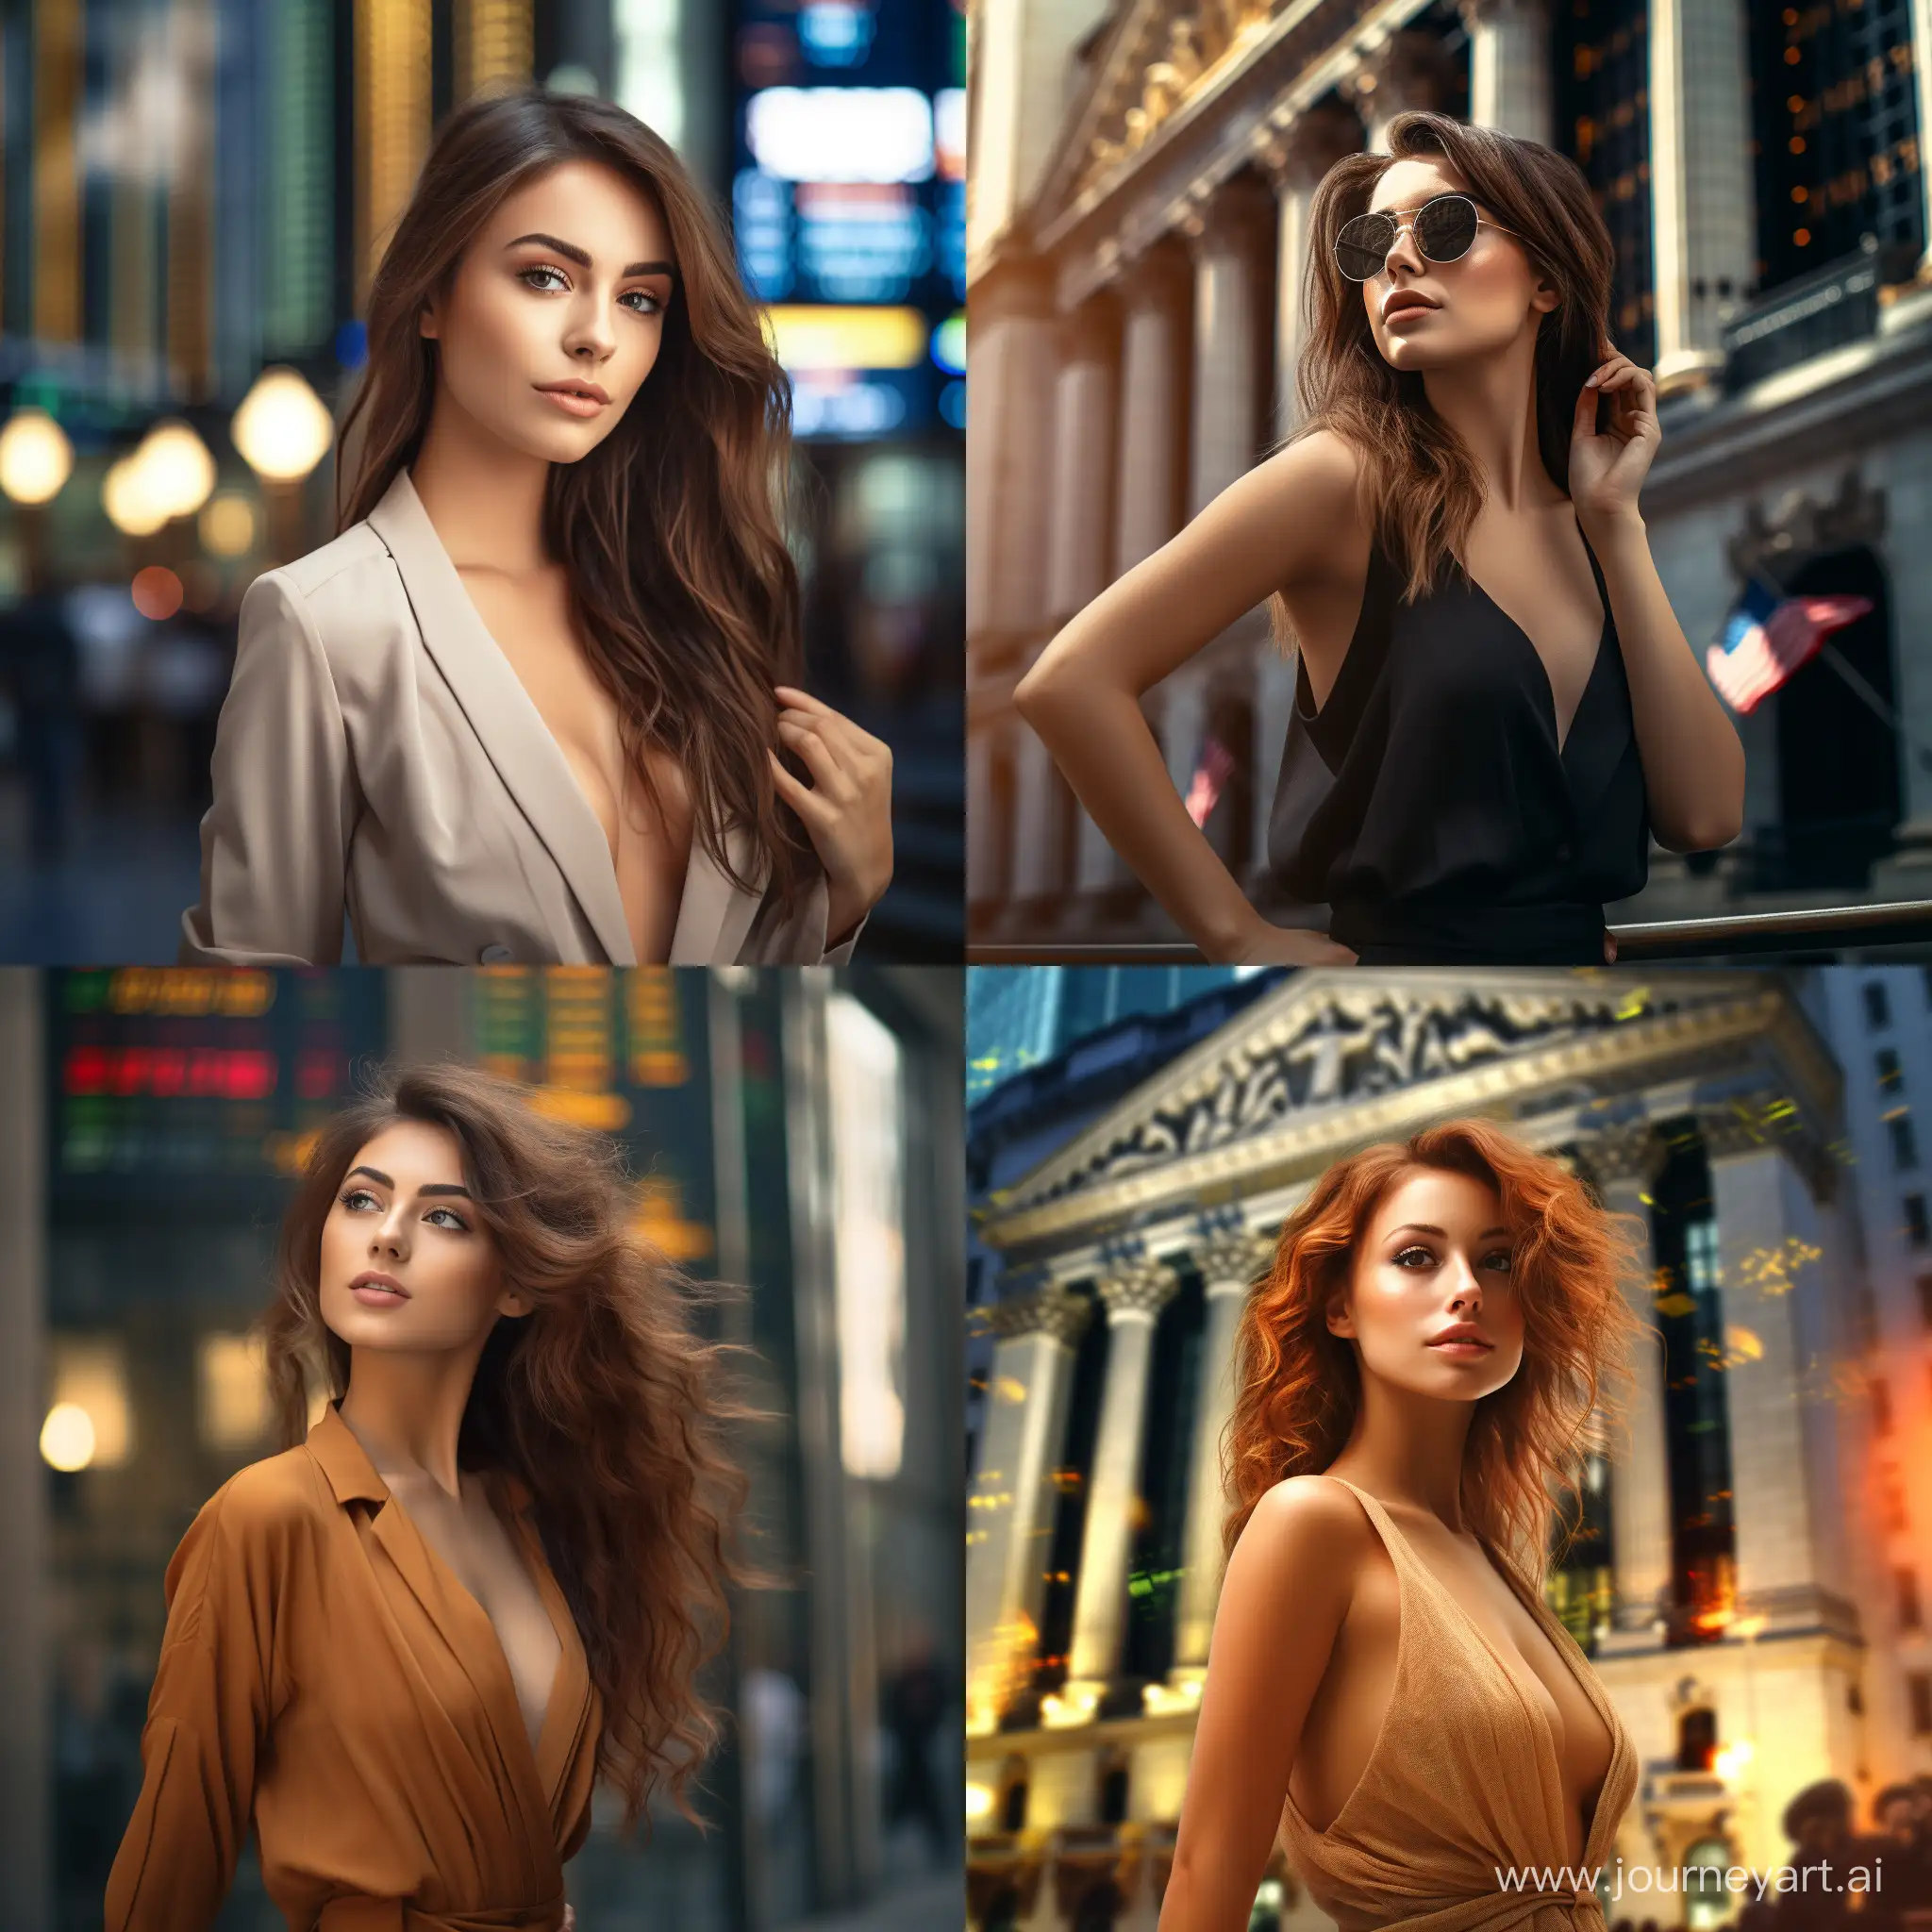 a beautiful girl with a satisfied expression on the background of the stock exchange building, financial markets, money.